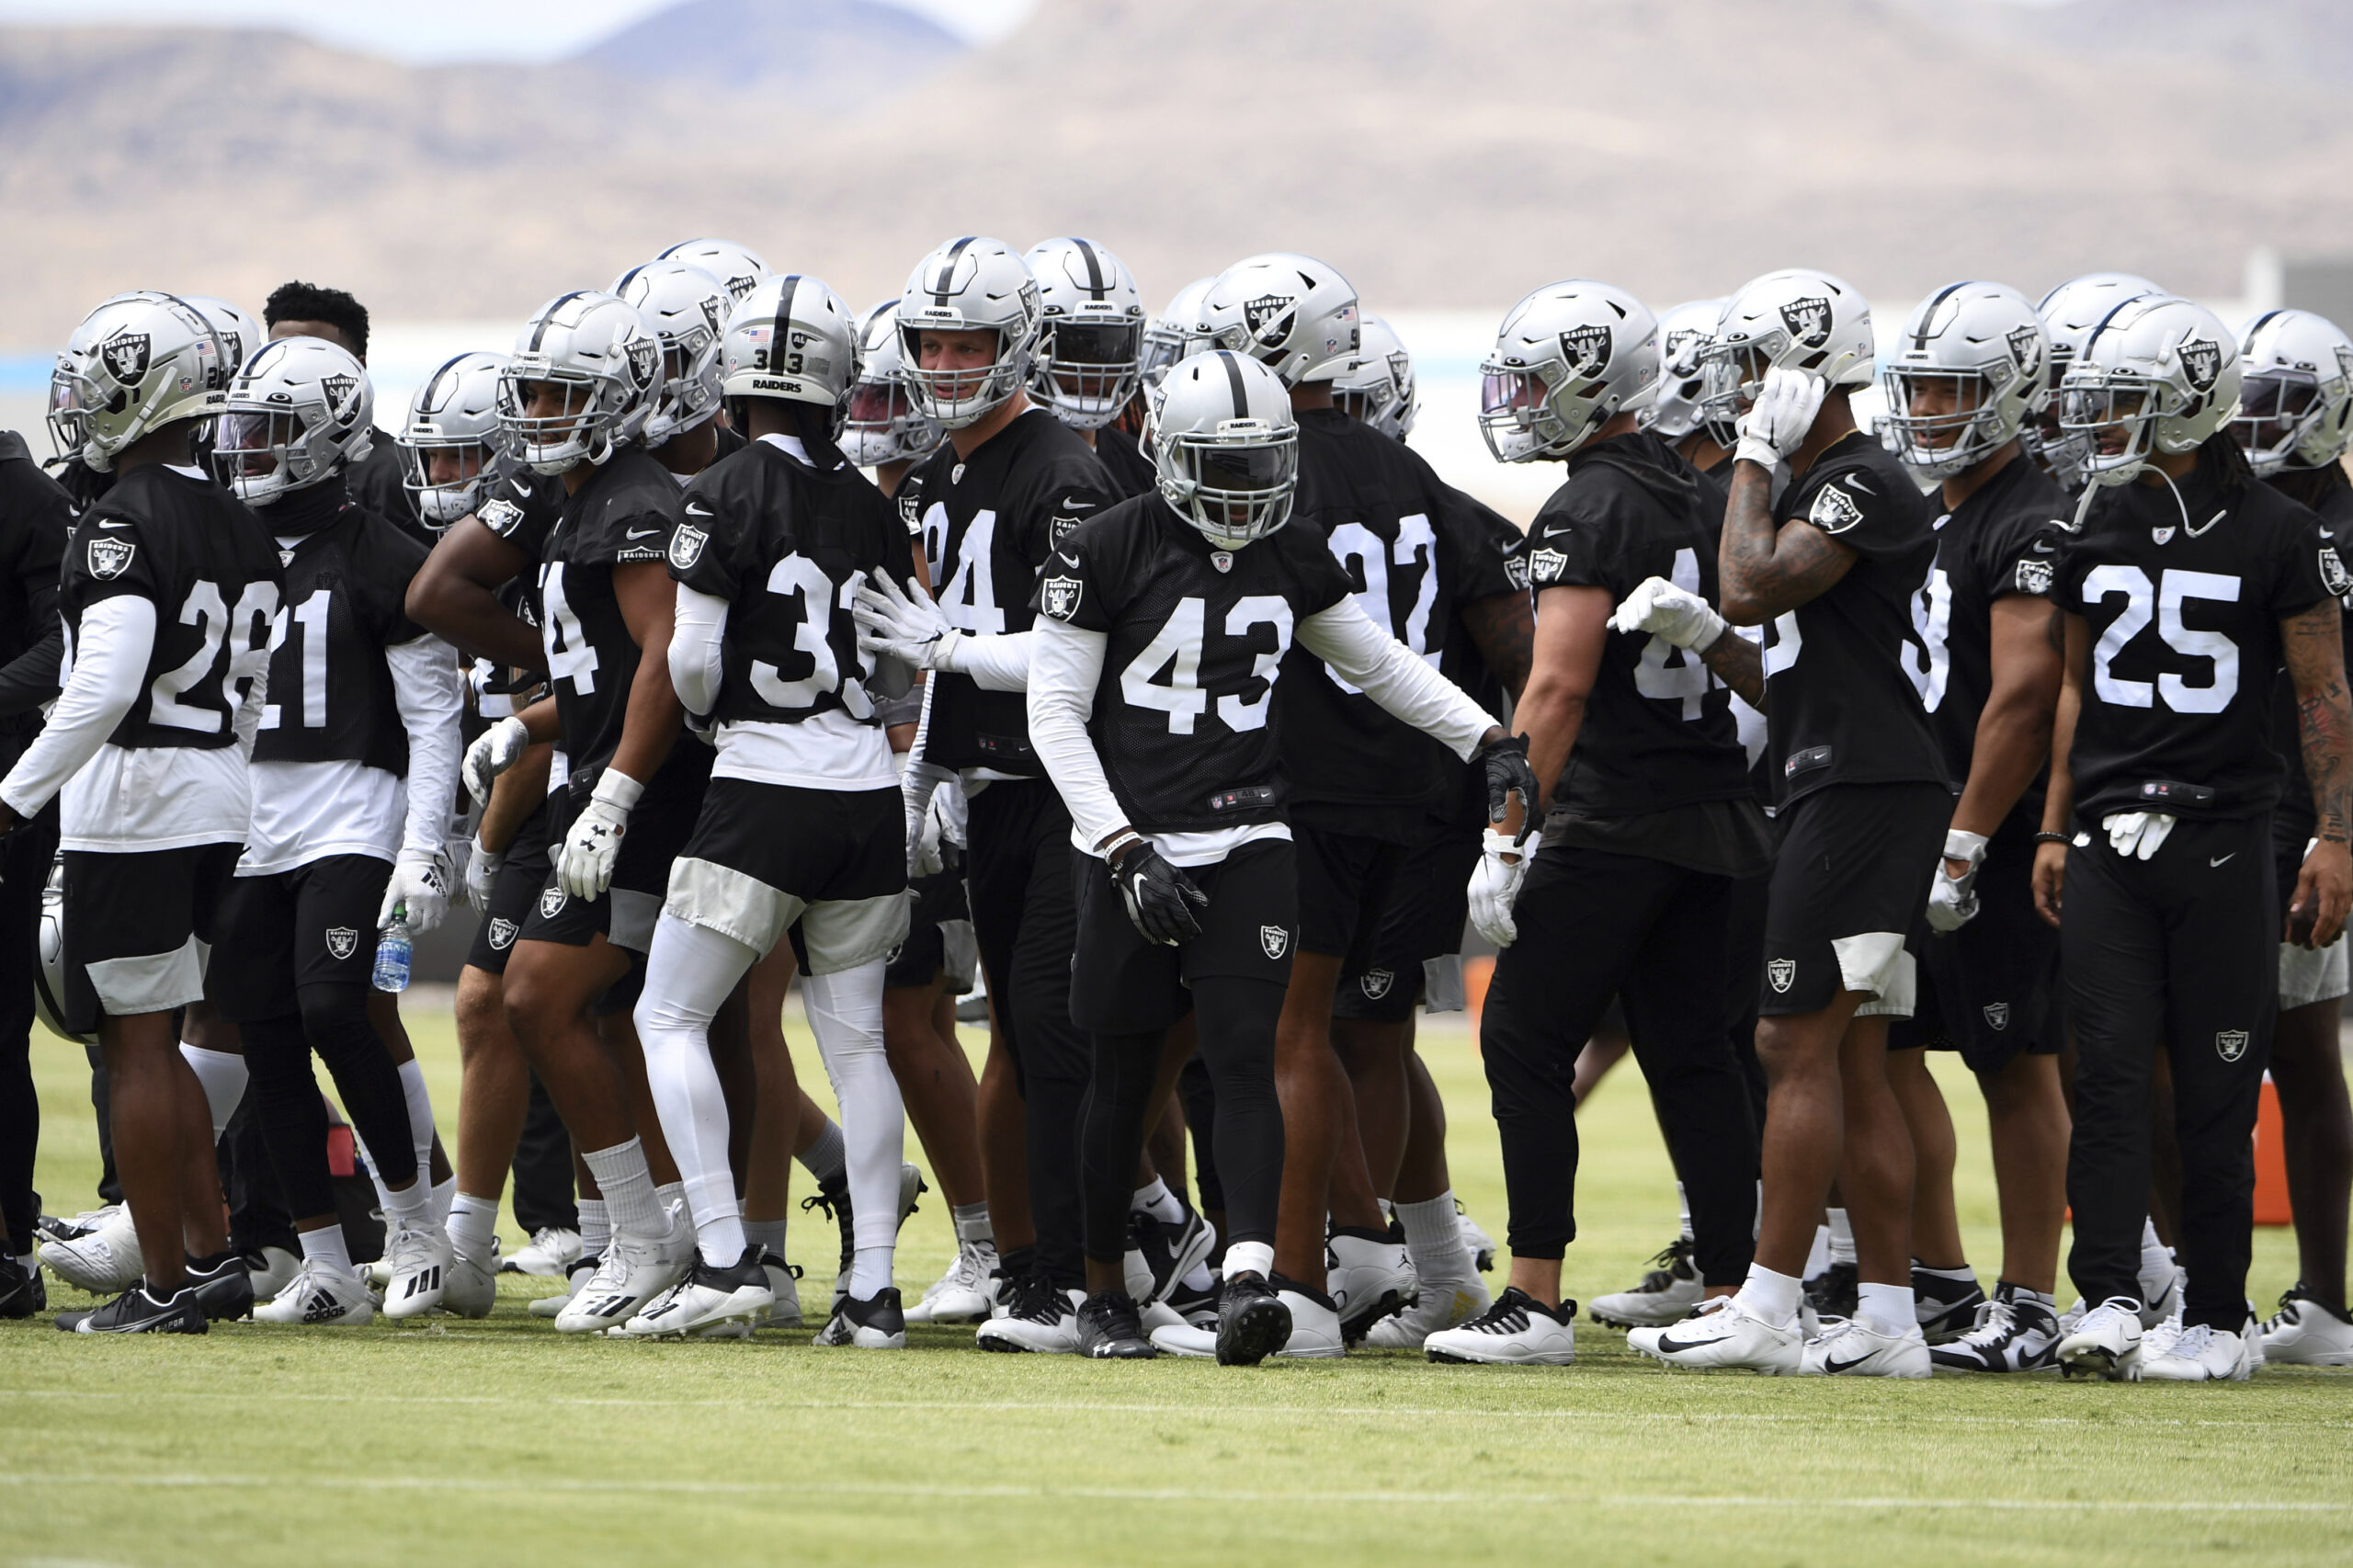 Raiders have each mentor immunized, more inoculated players than most teams